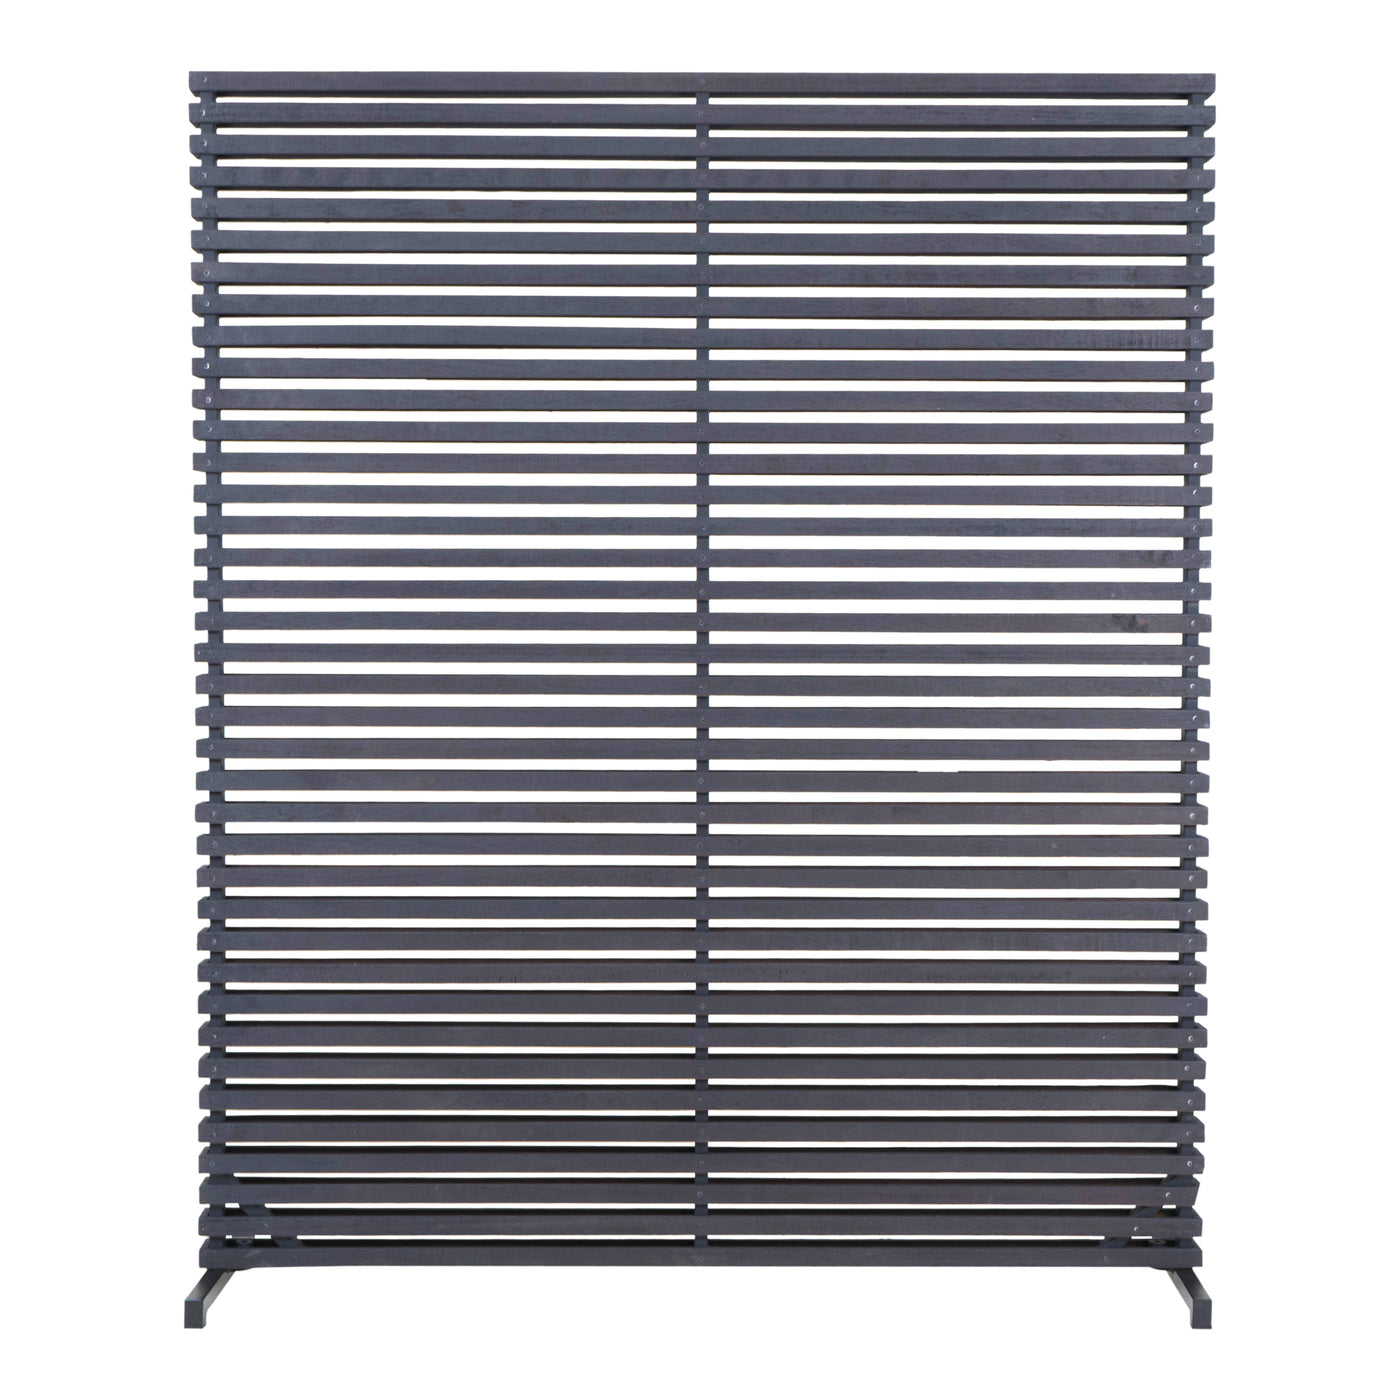 This large screen is made with a sturdy, aluminum frame and natural, hardwood slats. Ideal for privacy or defining differe...